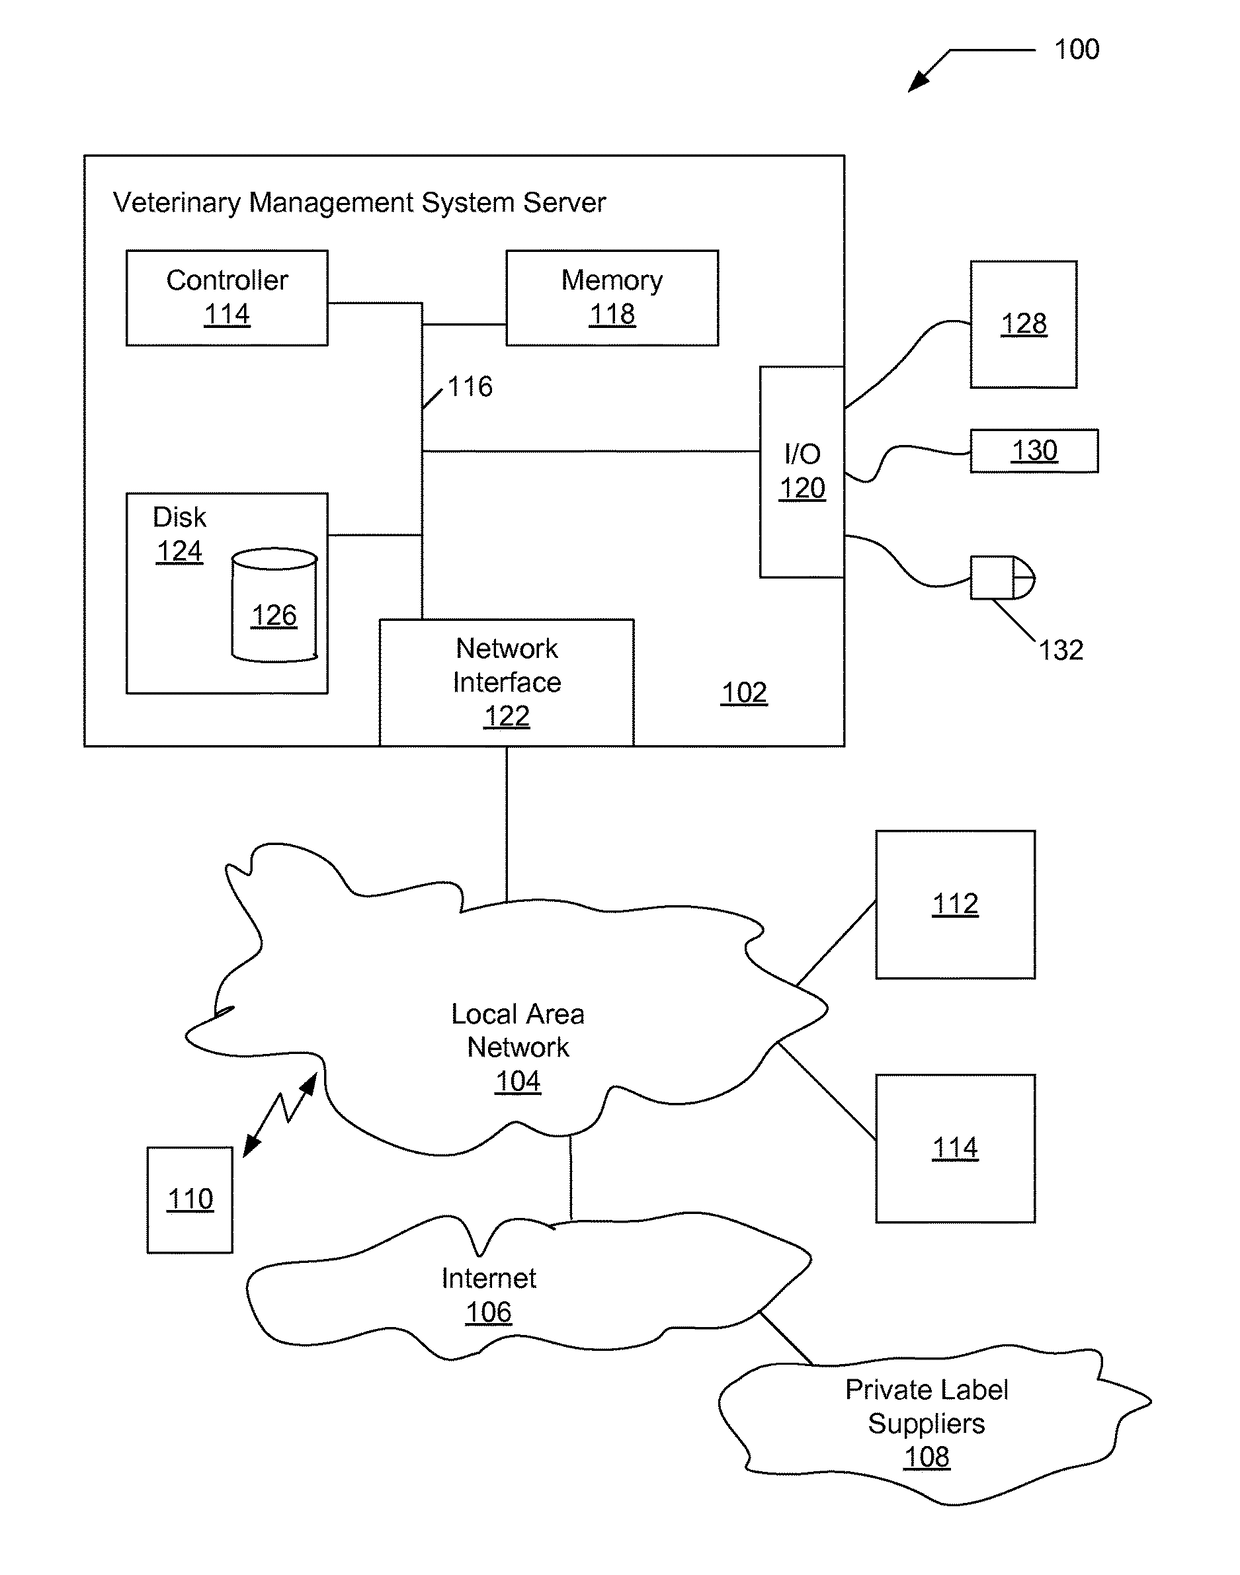 System and method for managing veterinary data